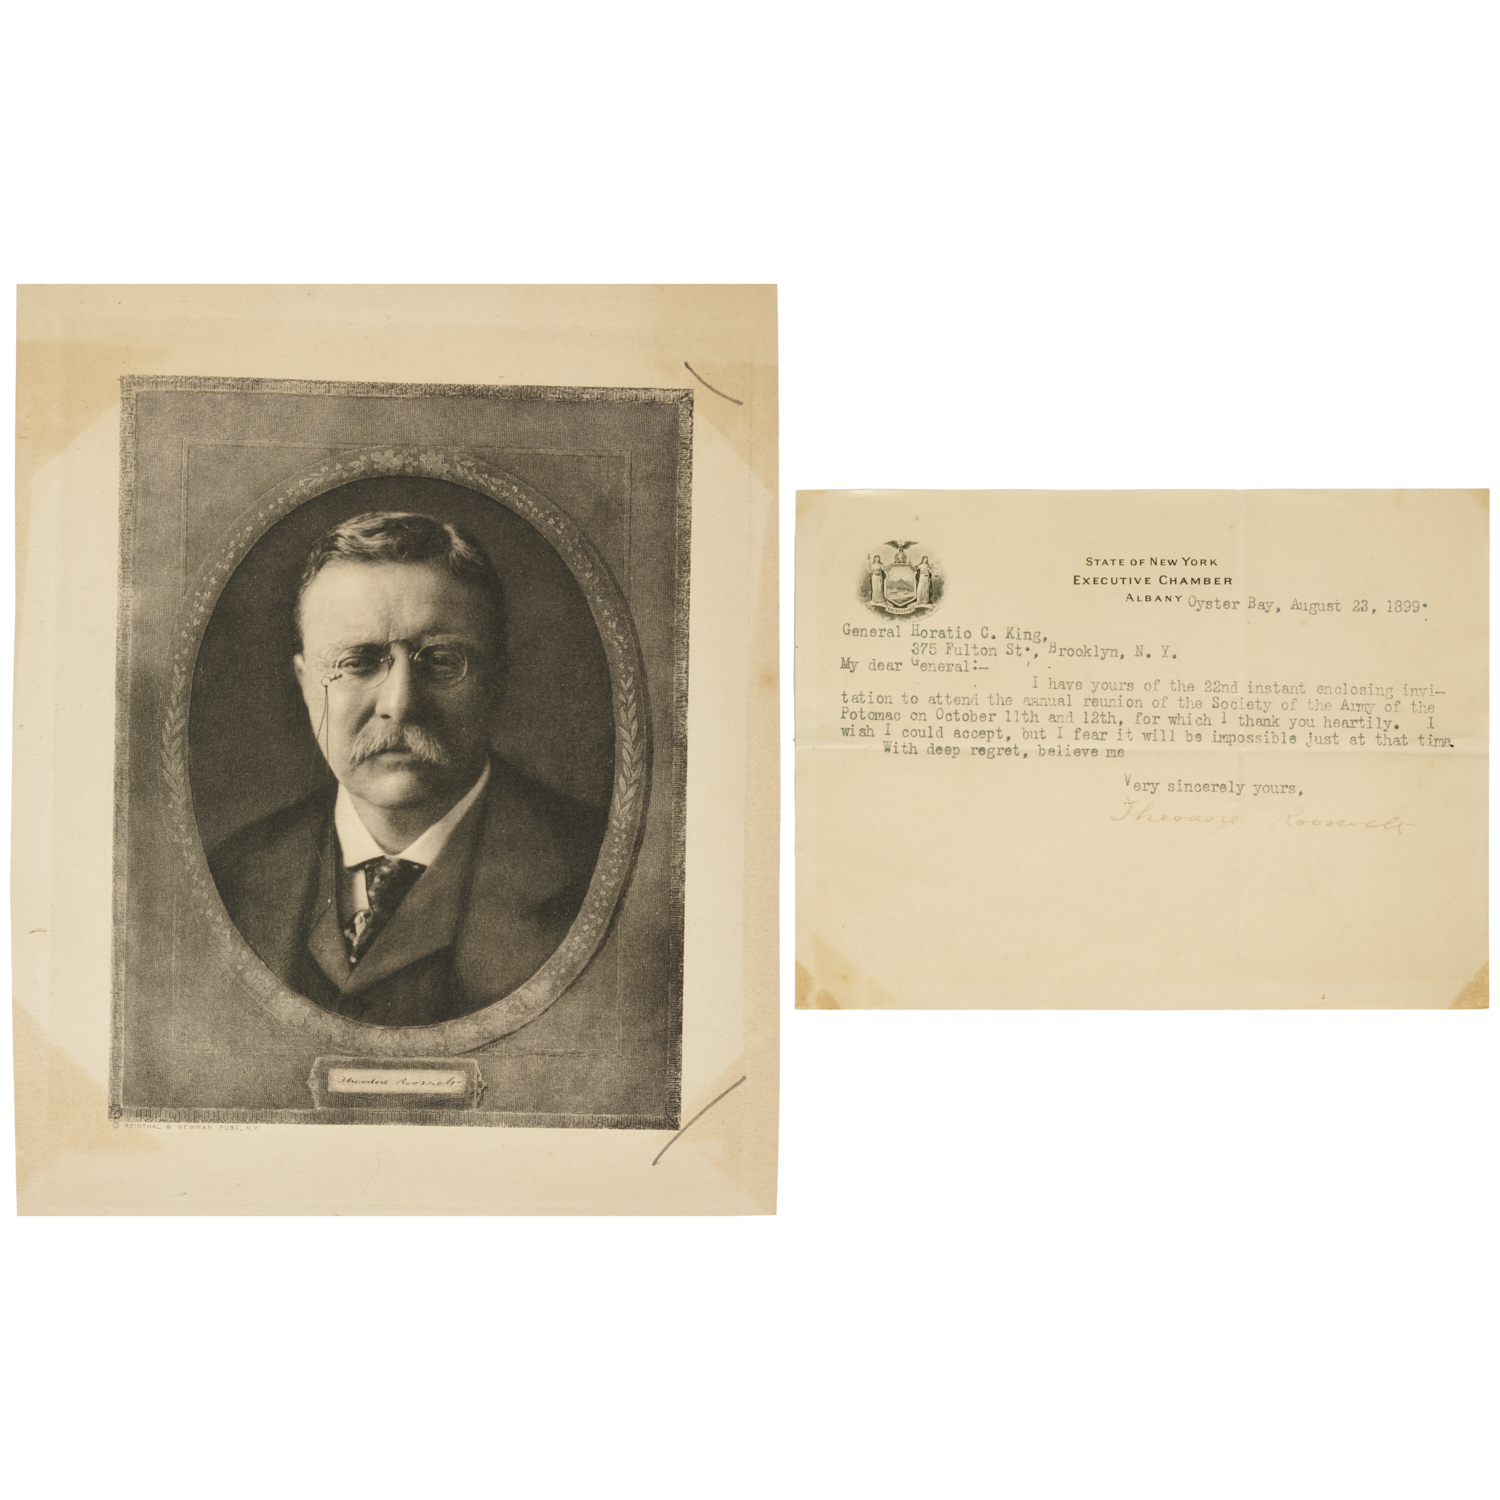 THEODORE ROOSEVELT TYPED LETTER  3c281e